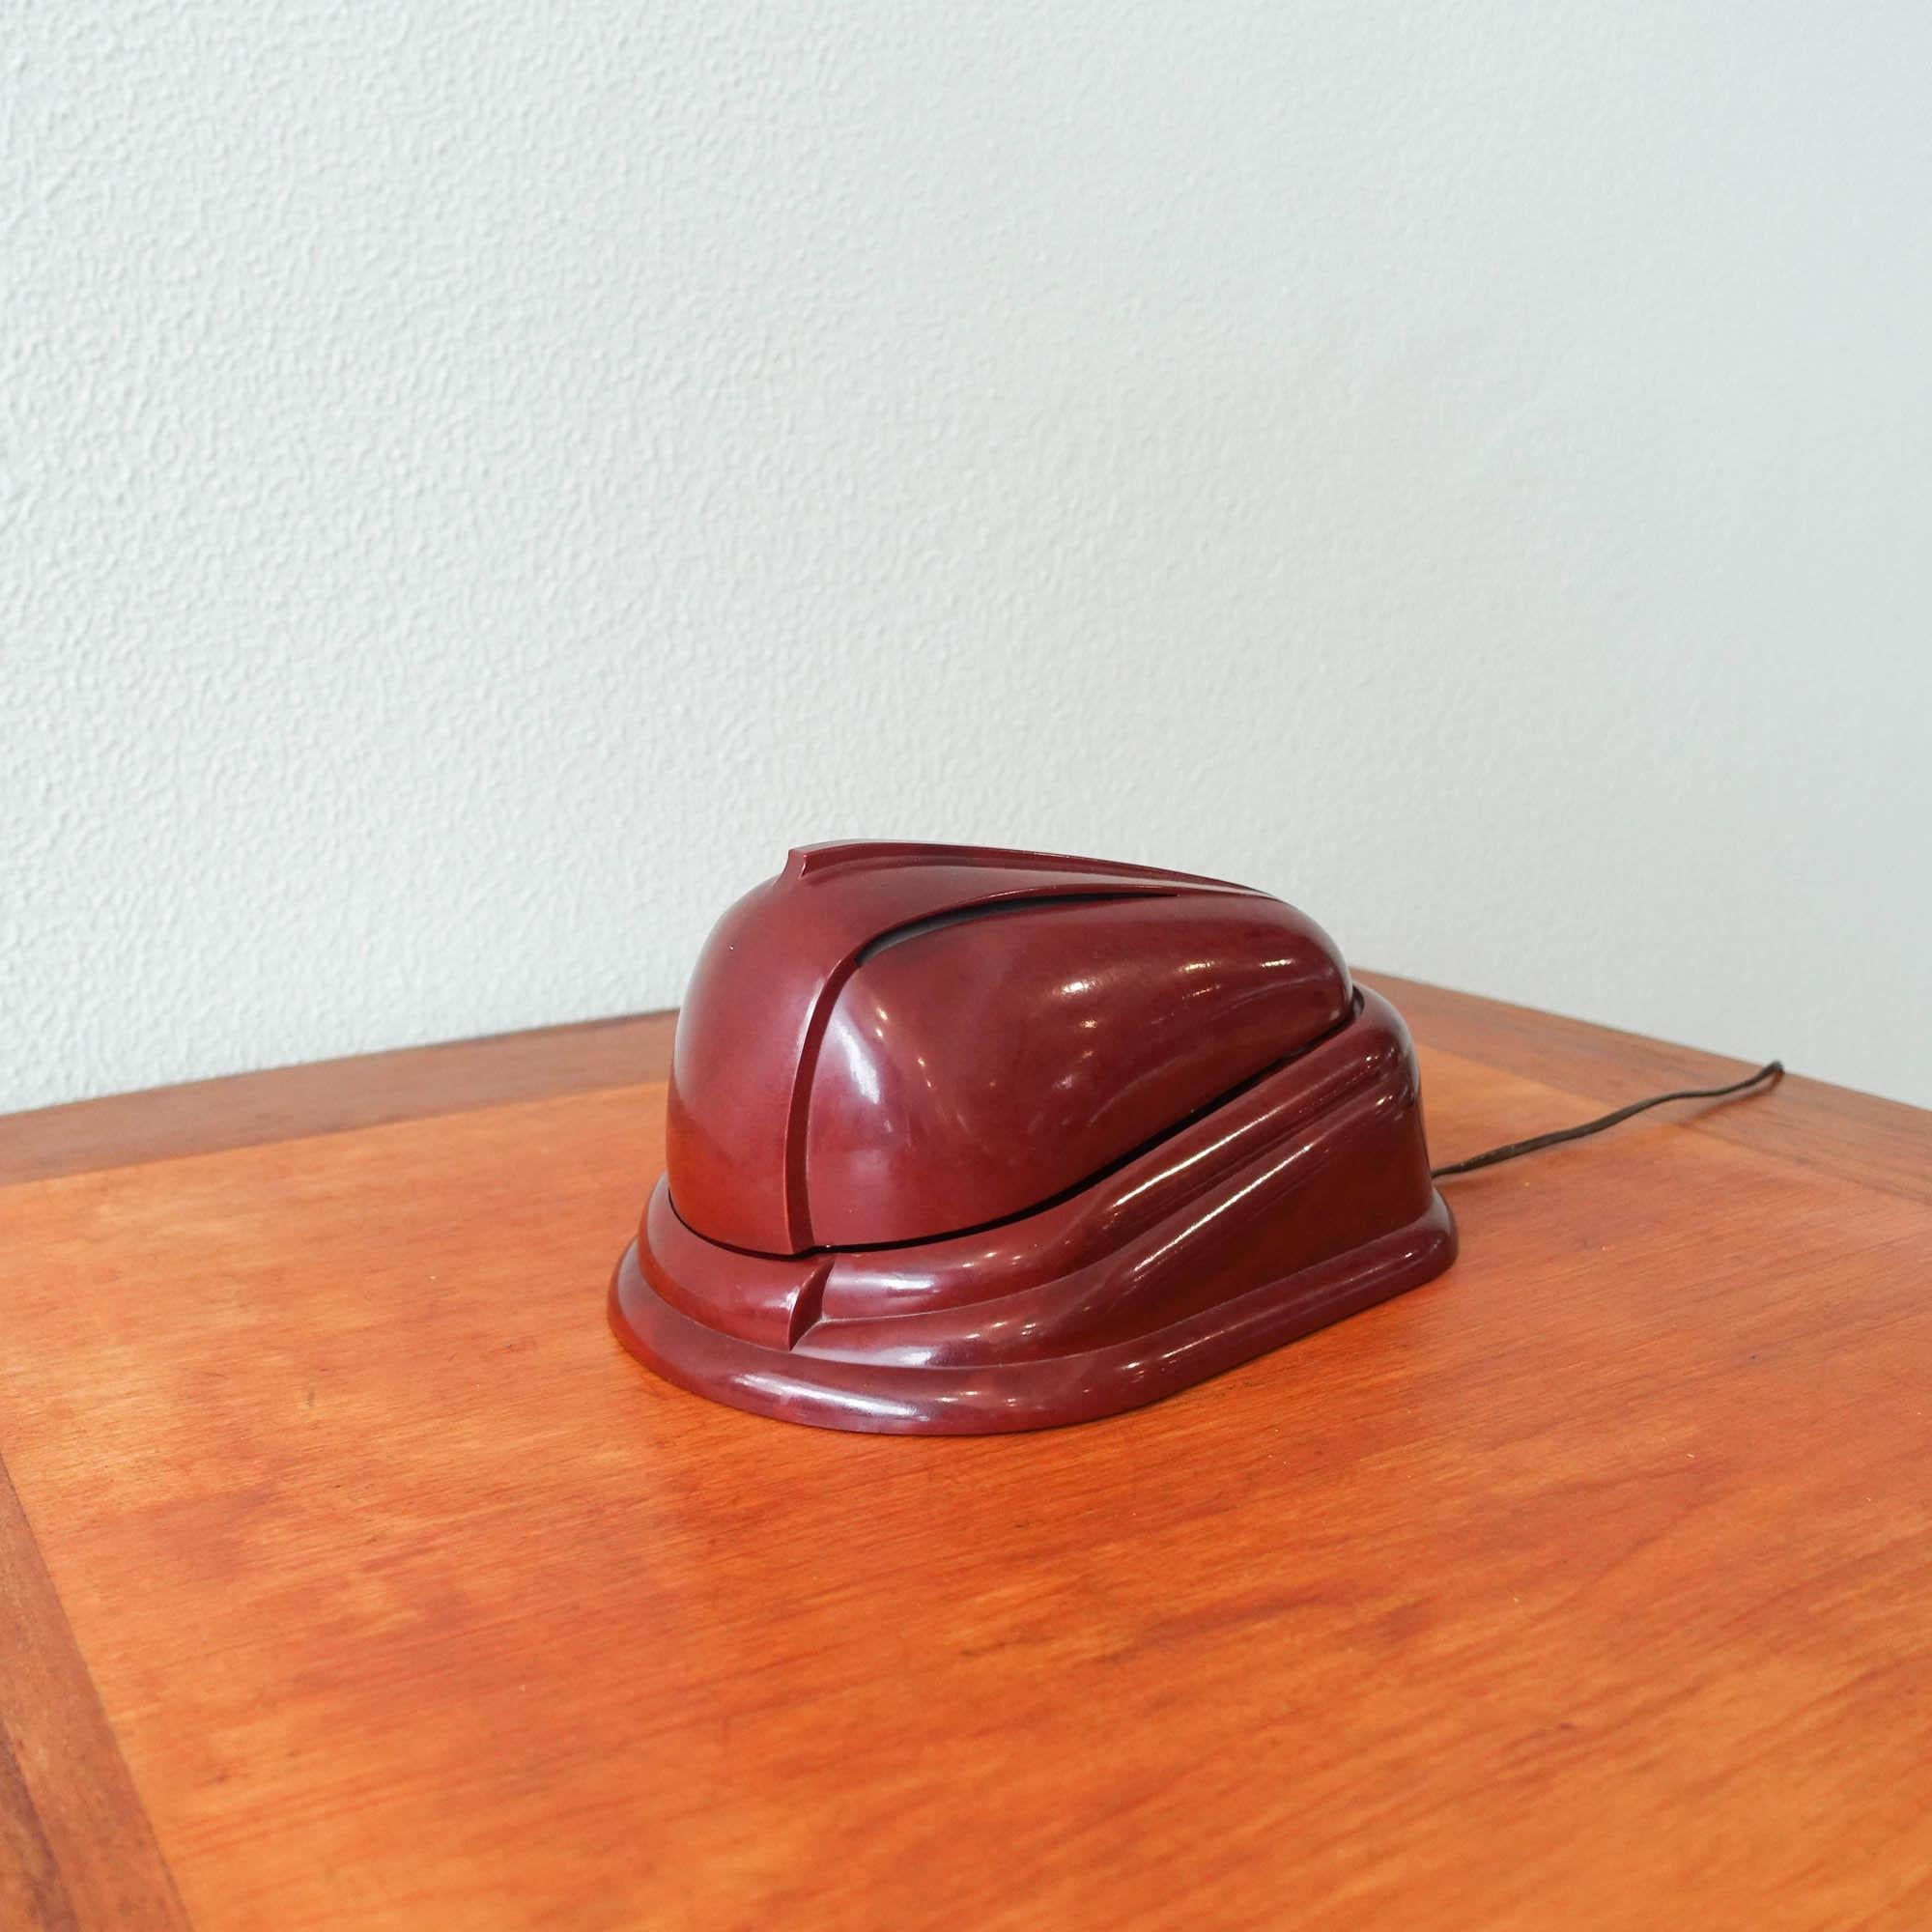 Model Bolide Table Lamp by Jumo Brevete for Jumo, 1940s For Sale 3